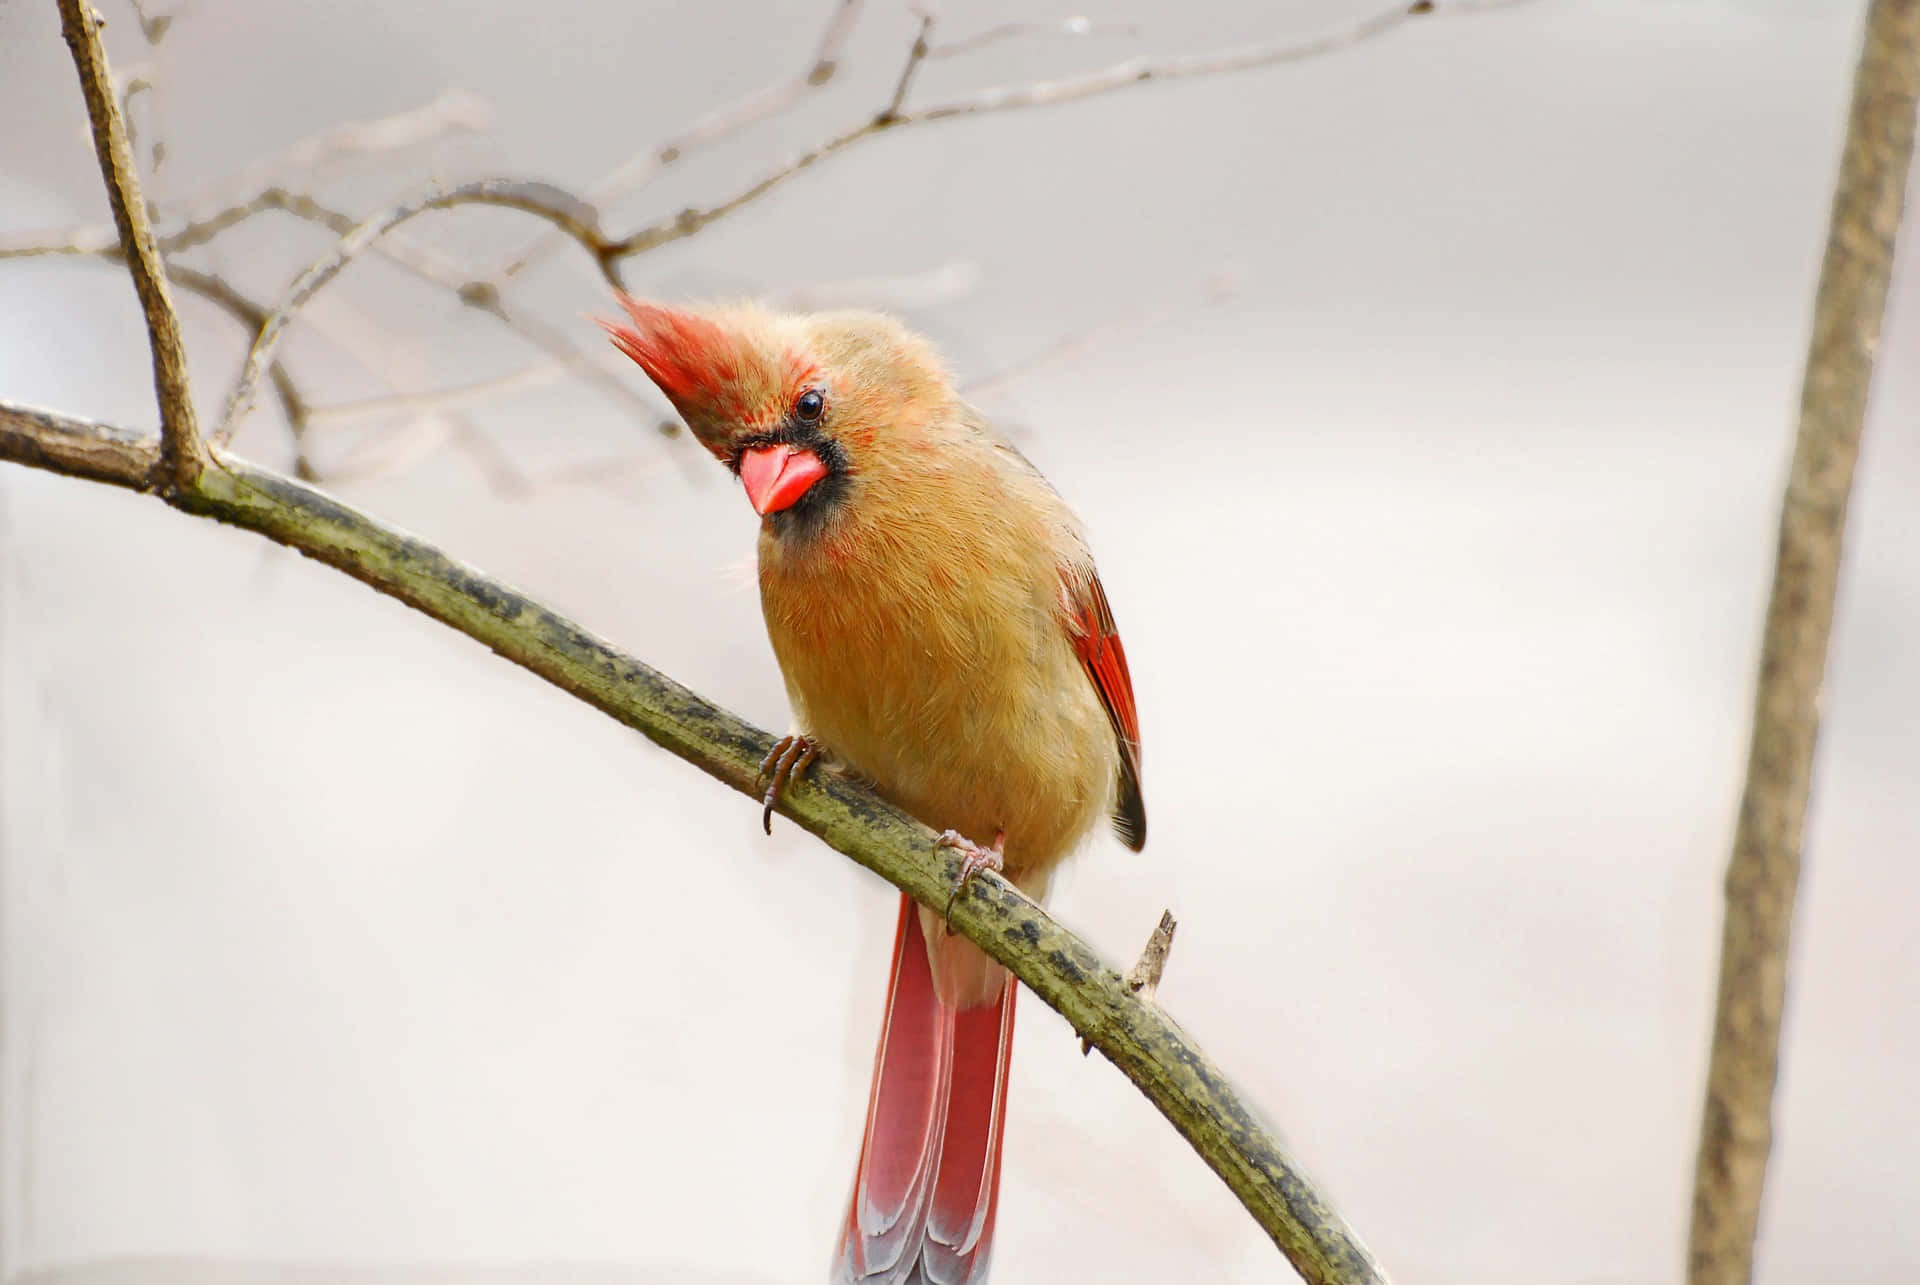 Stunning view of a majestic cardinal perched atop a tree branch